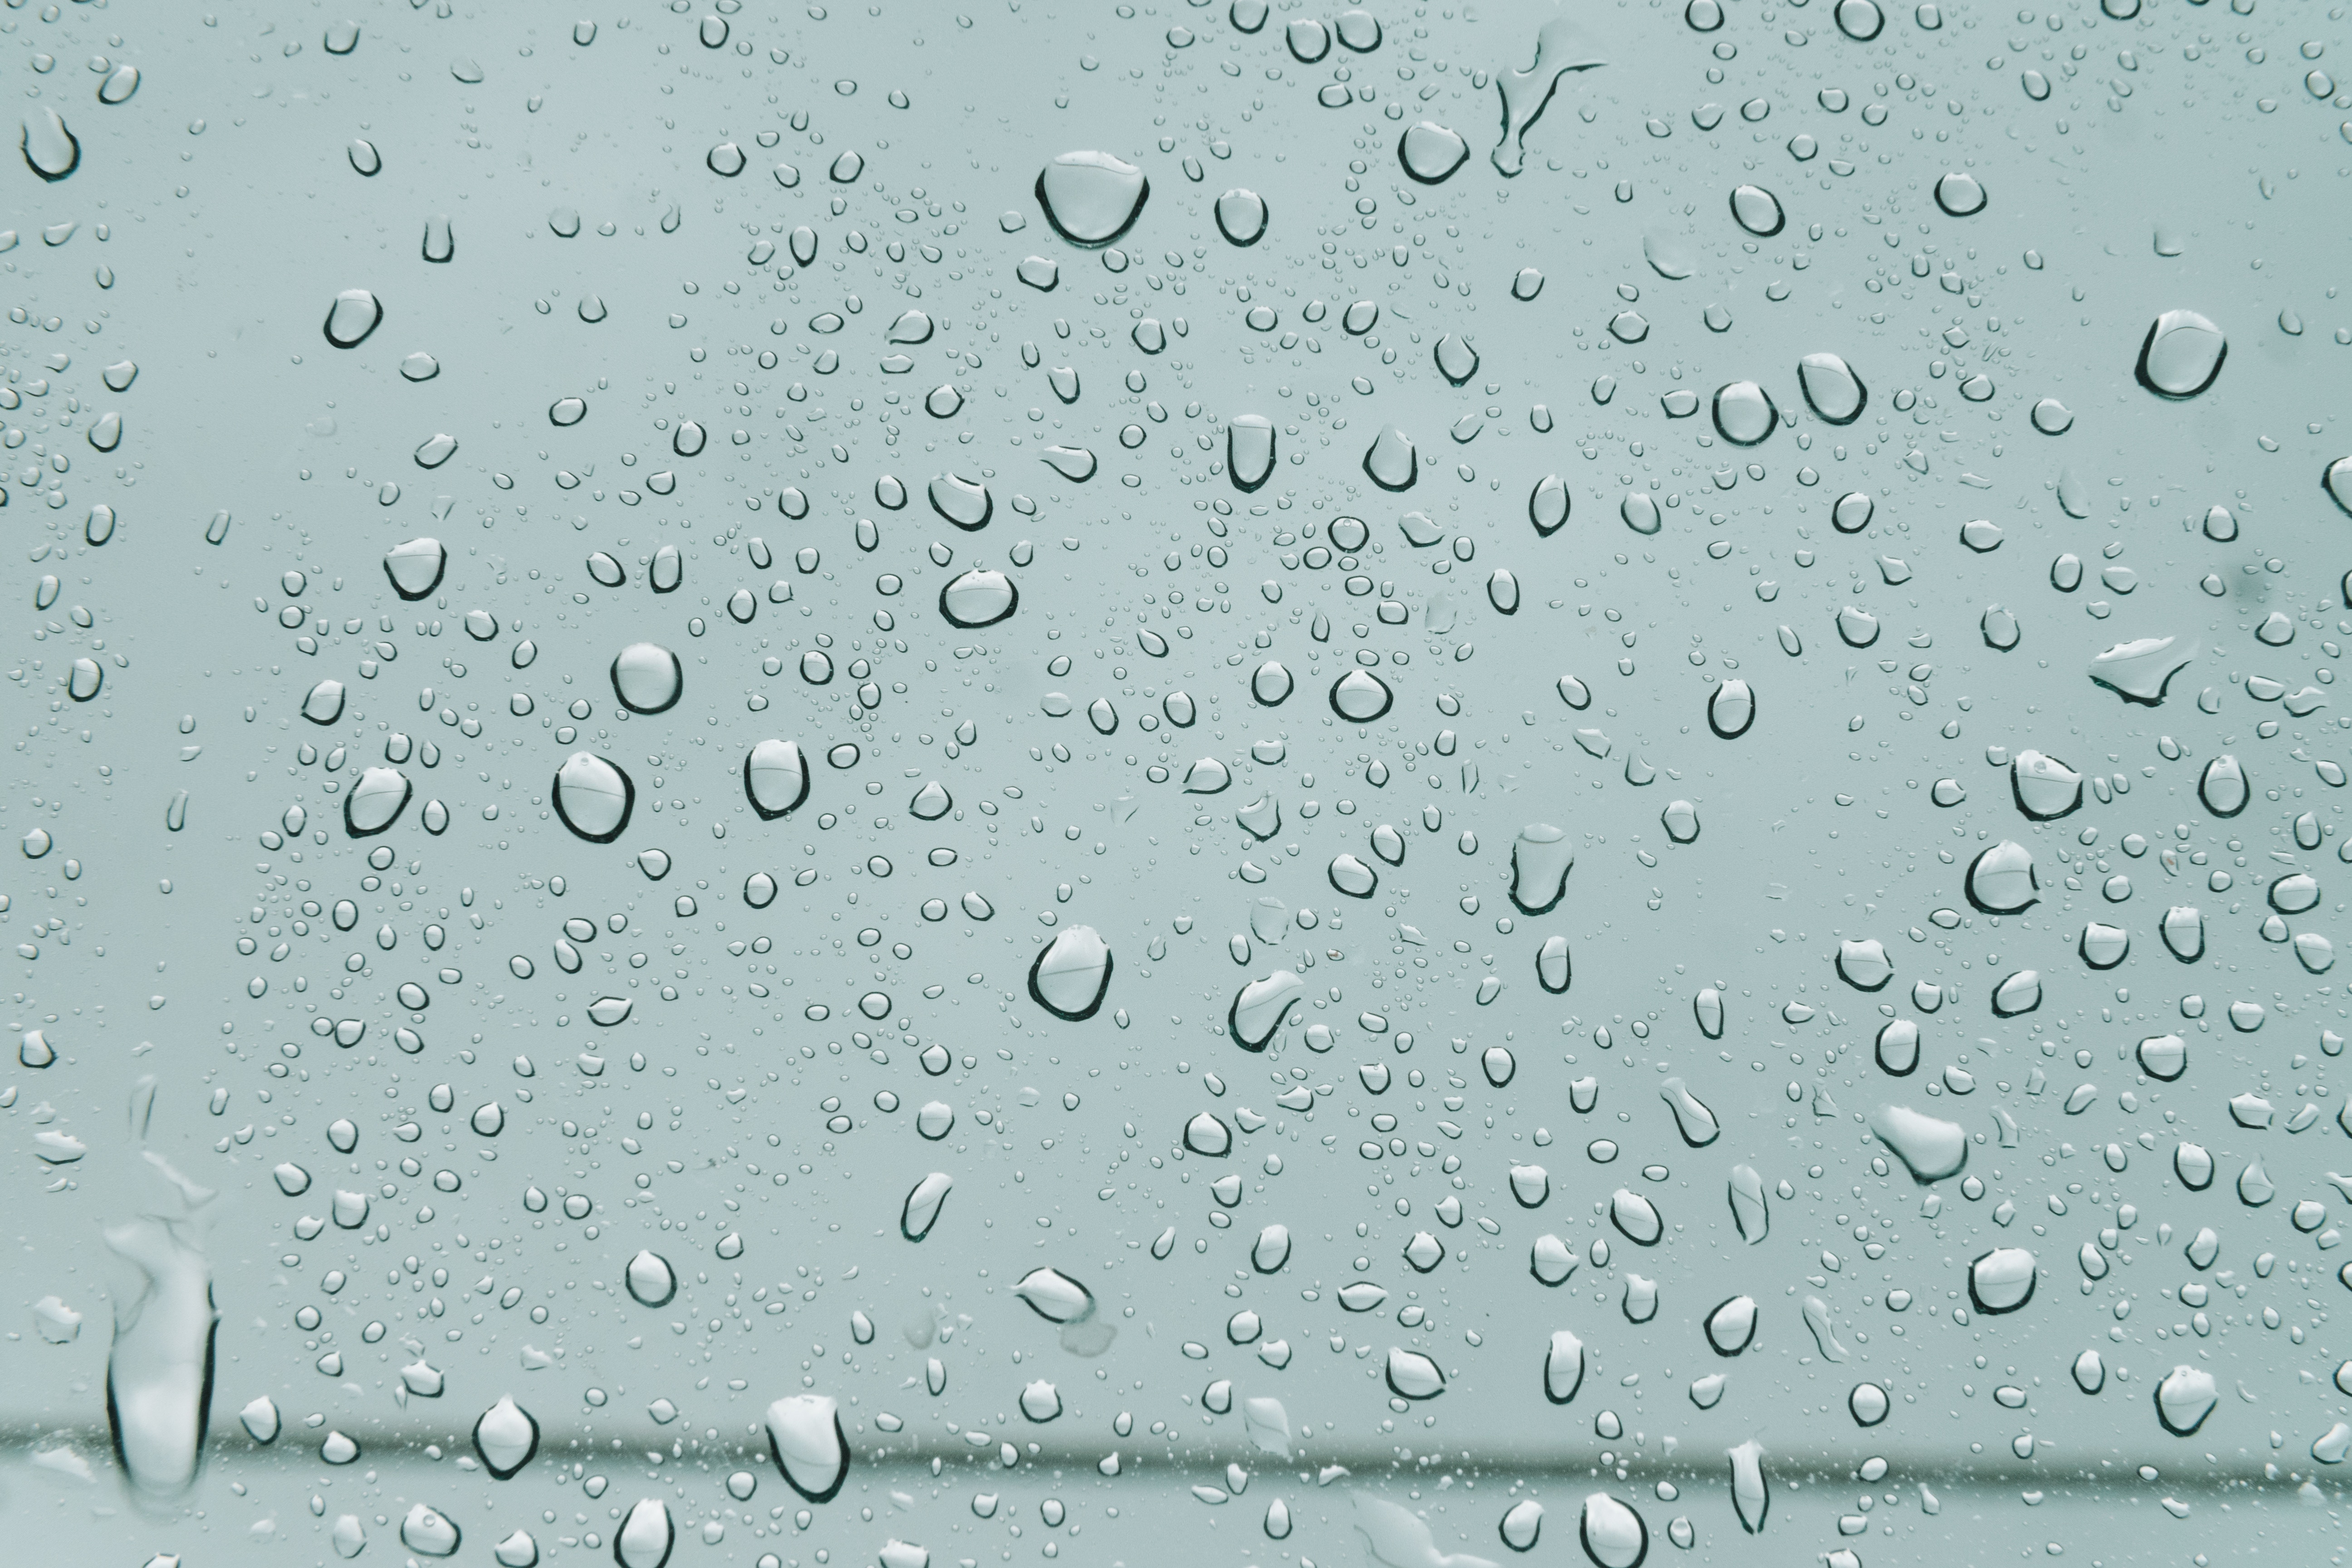 form, forms, rain, surface, drops, macro, wet, moisture, humid cell phone wallpapers